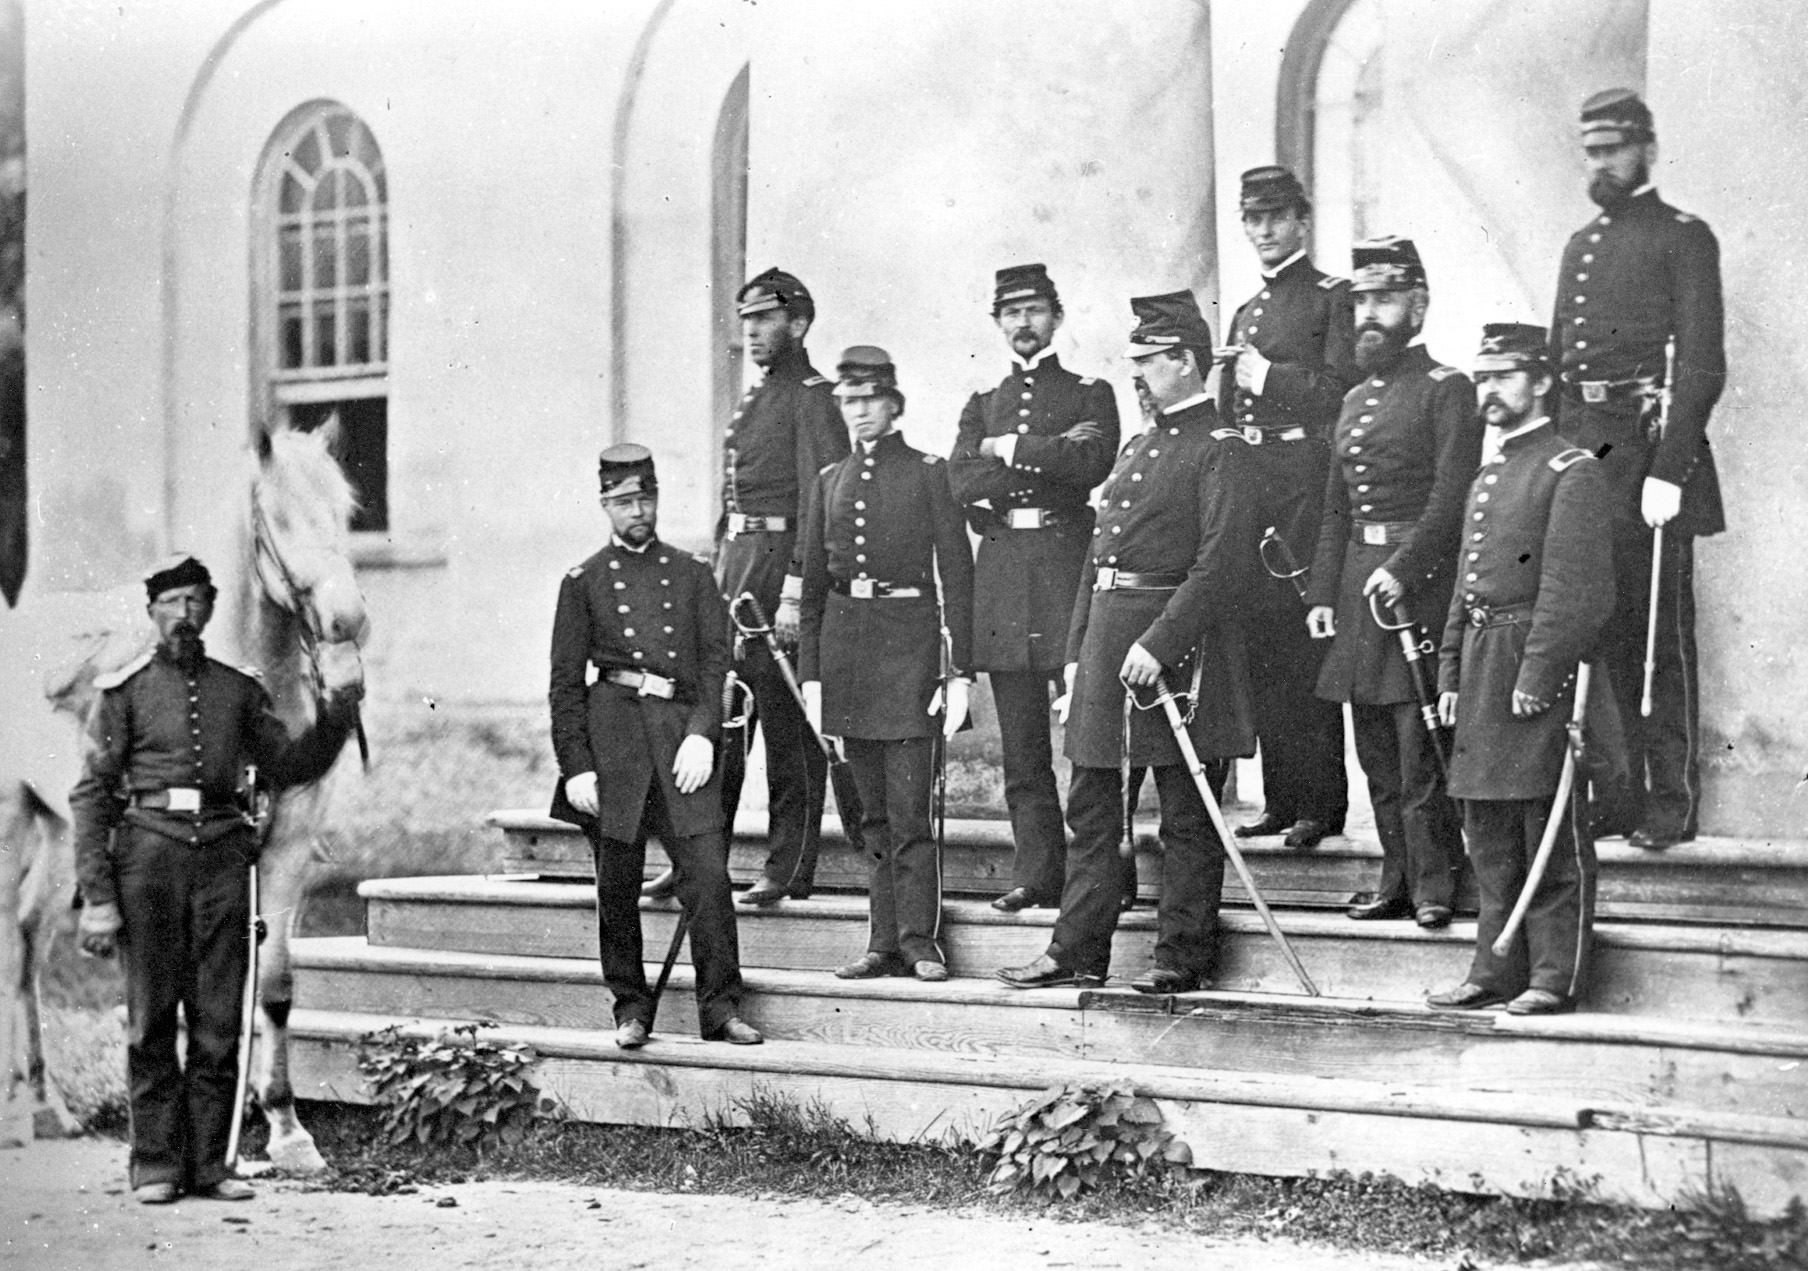 General McDowell, hand on sword at center, poses with his staff on the steps of Robert E. Lee’s former Arlington, Va., home.